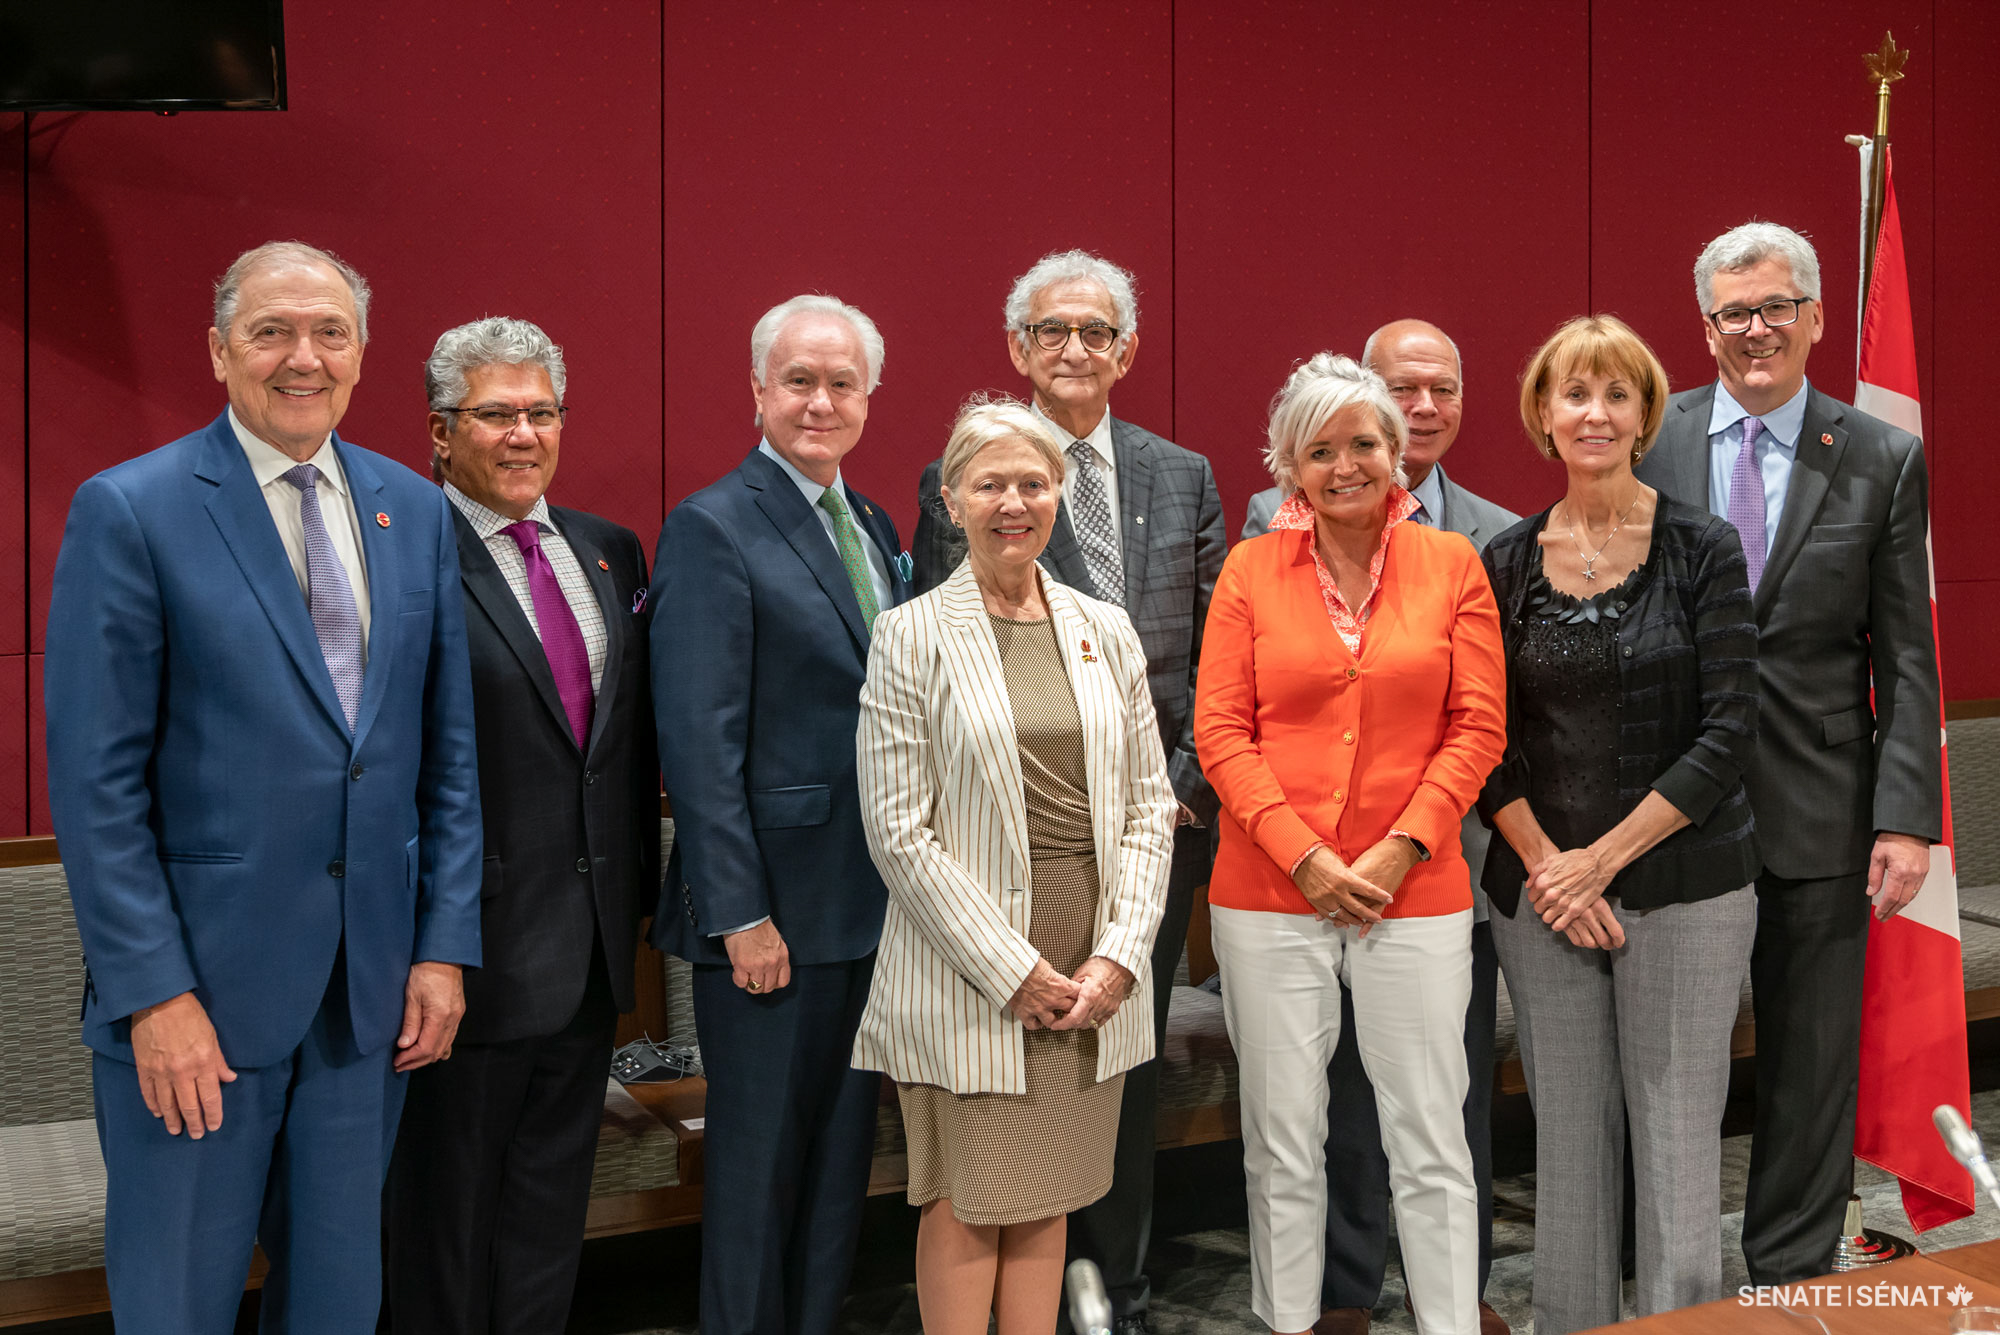 Senator Deacon (far right) poses with fellow senators who were members of the Senate Committee on Banking, Trade and Commerce in 2019.